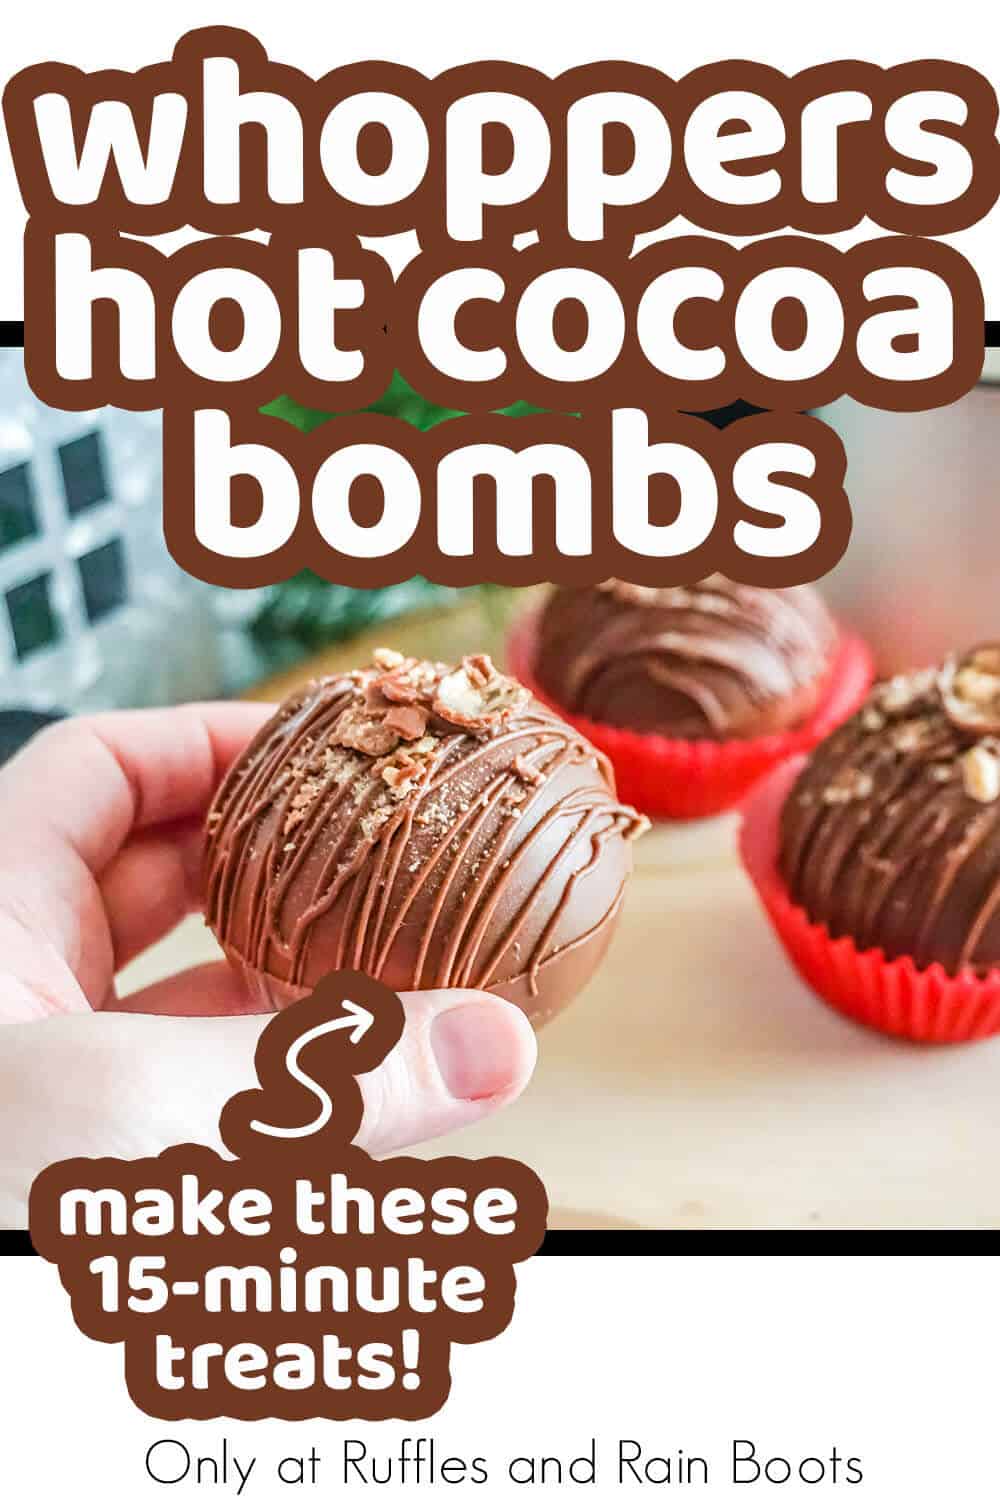 malted hot cocoa bomb recipe with text which reads whoppers hot cocoa bombs make these 15-minute treats!